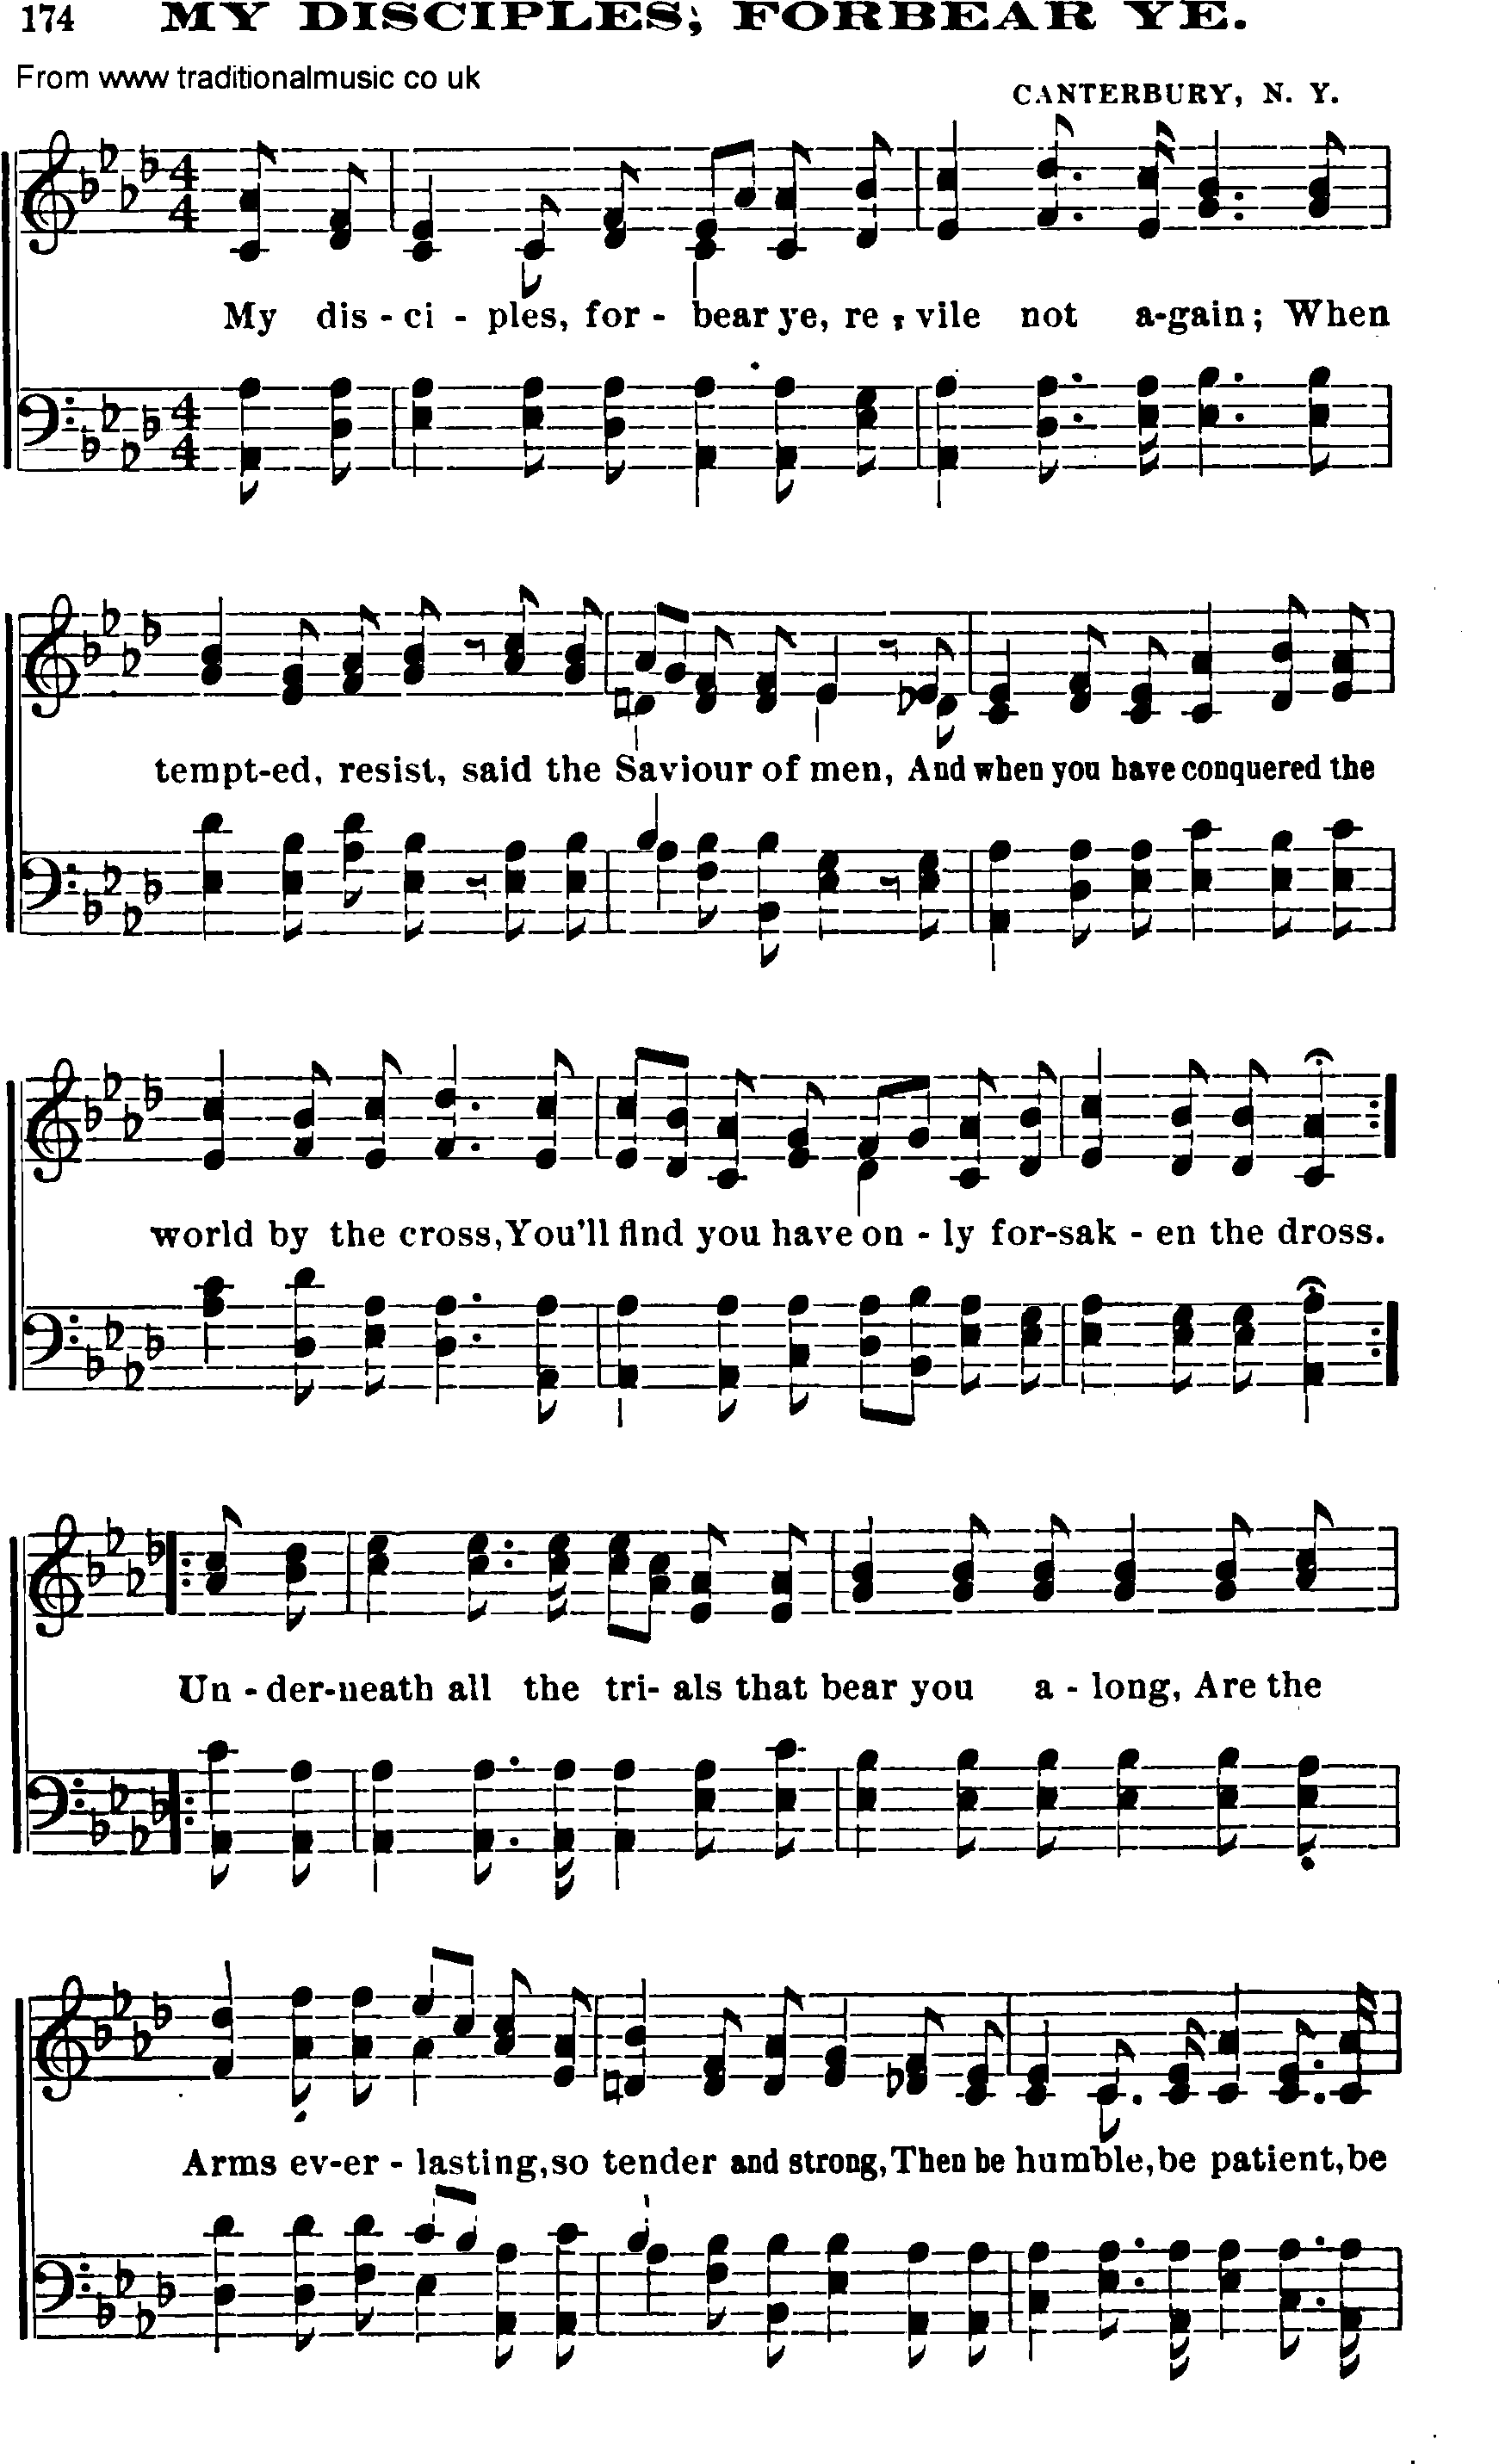 Shaker Music collection, Hymn: my disciples, forbear ye, sheetmusic and PDF